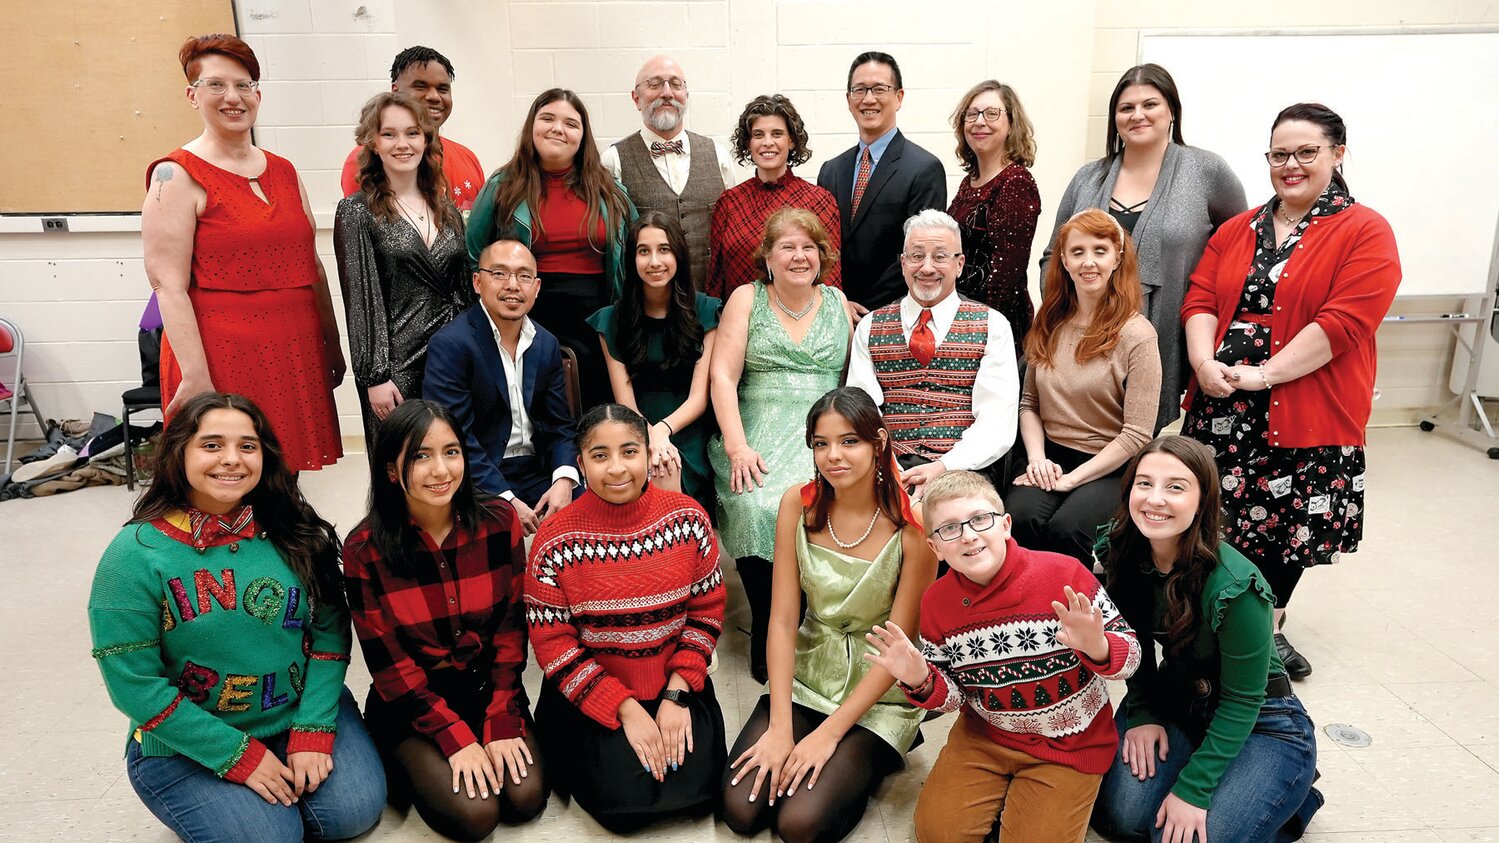 The cast of “A Very Kelsey Cabaret” will be spreading holiday cheer for one night only on Dec. 9 at Mercer County Community College’s Kelsey Theatre in West Windsor, N.J.